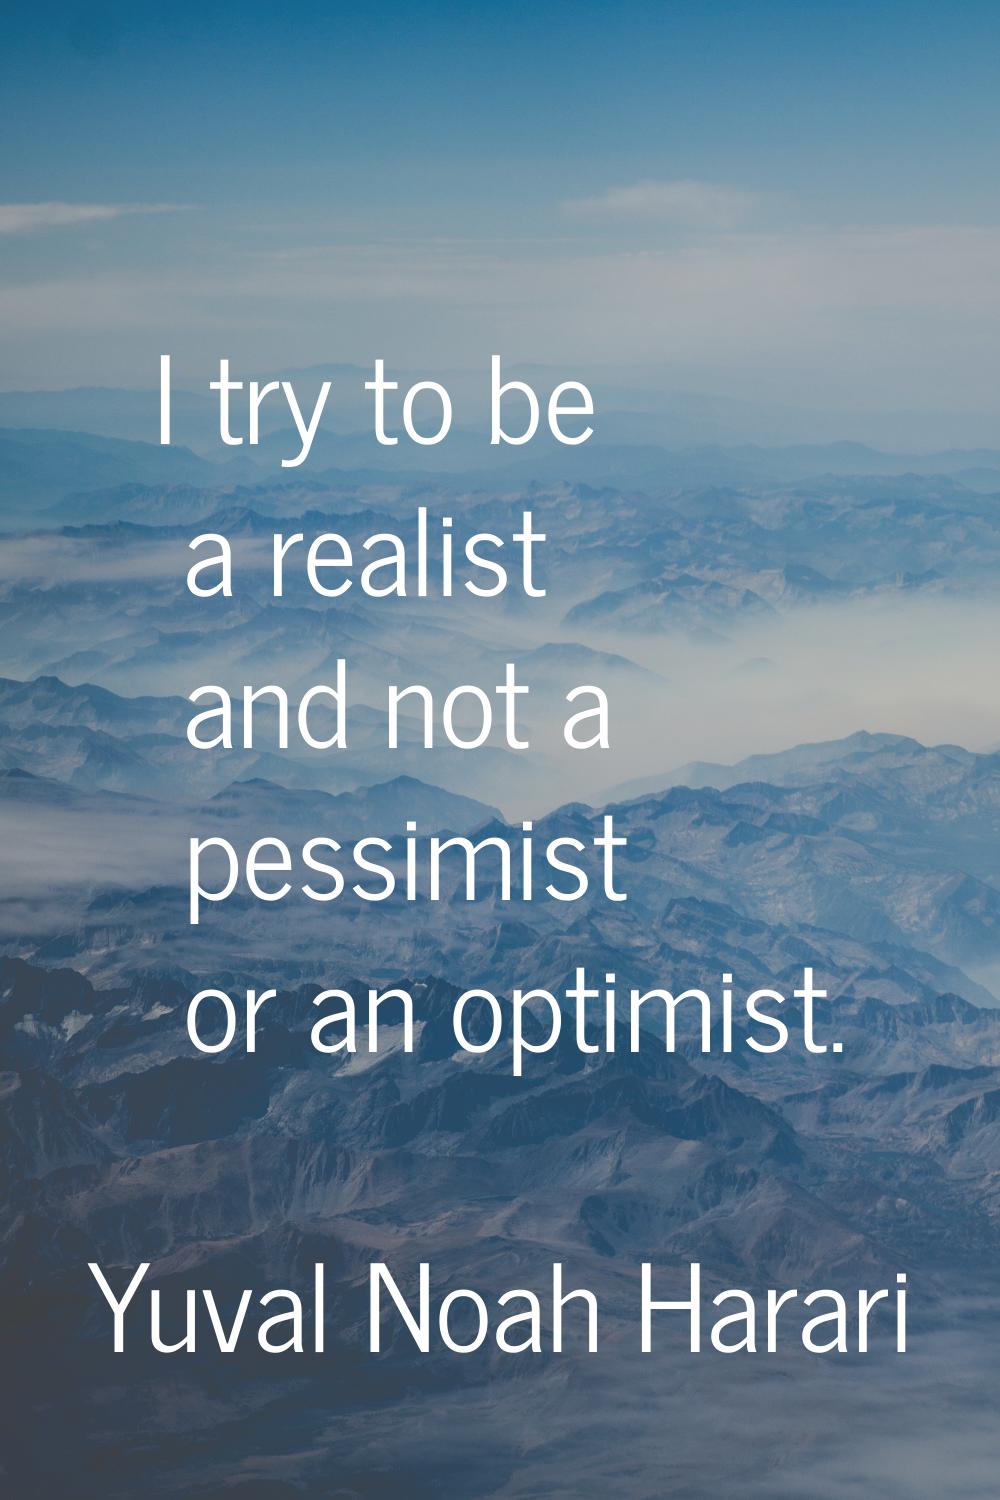 I try to be a realist and not a pessimist or an optimist.